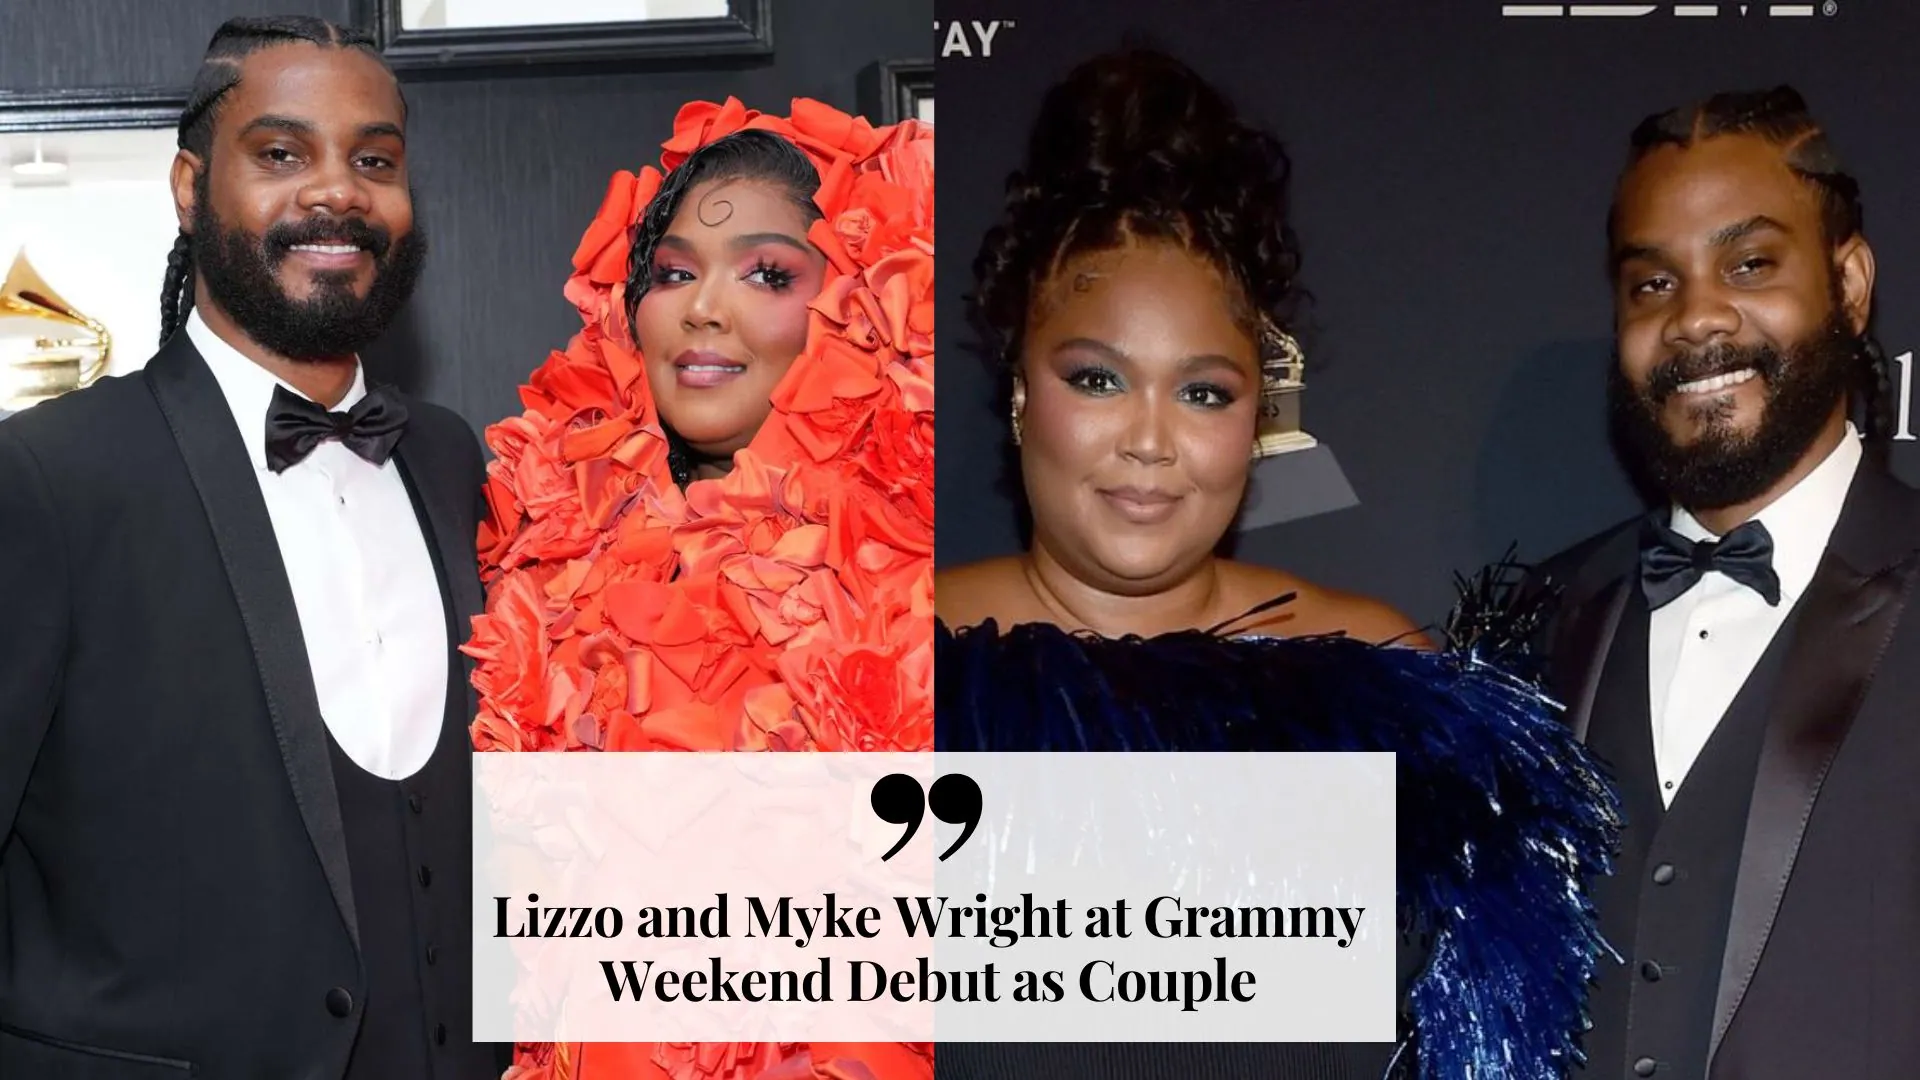 Lizzo and Myke Wright at Grammy Weekend Debut as Couple (image credit: gretty)